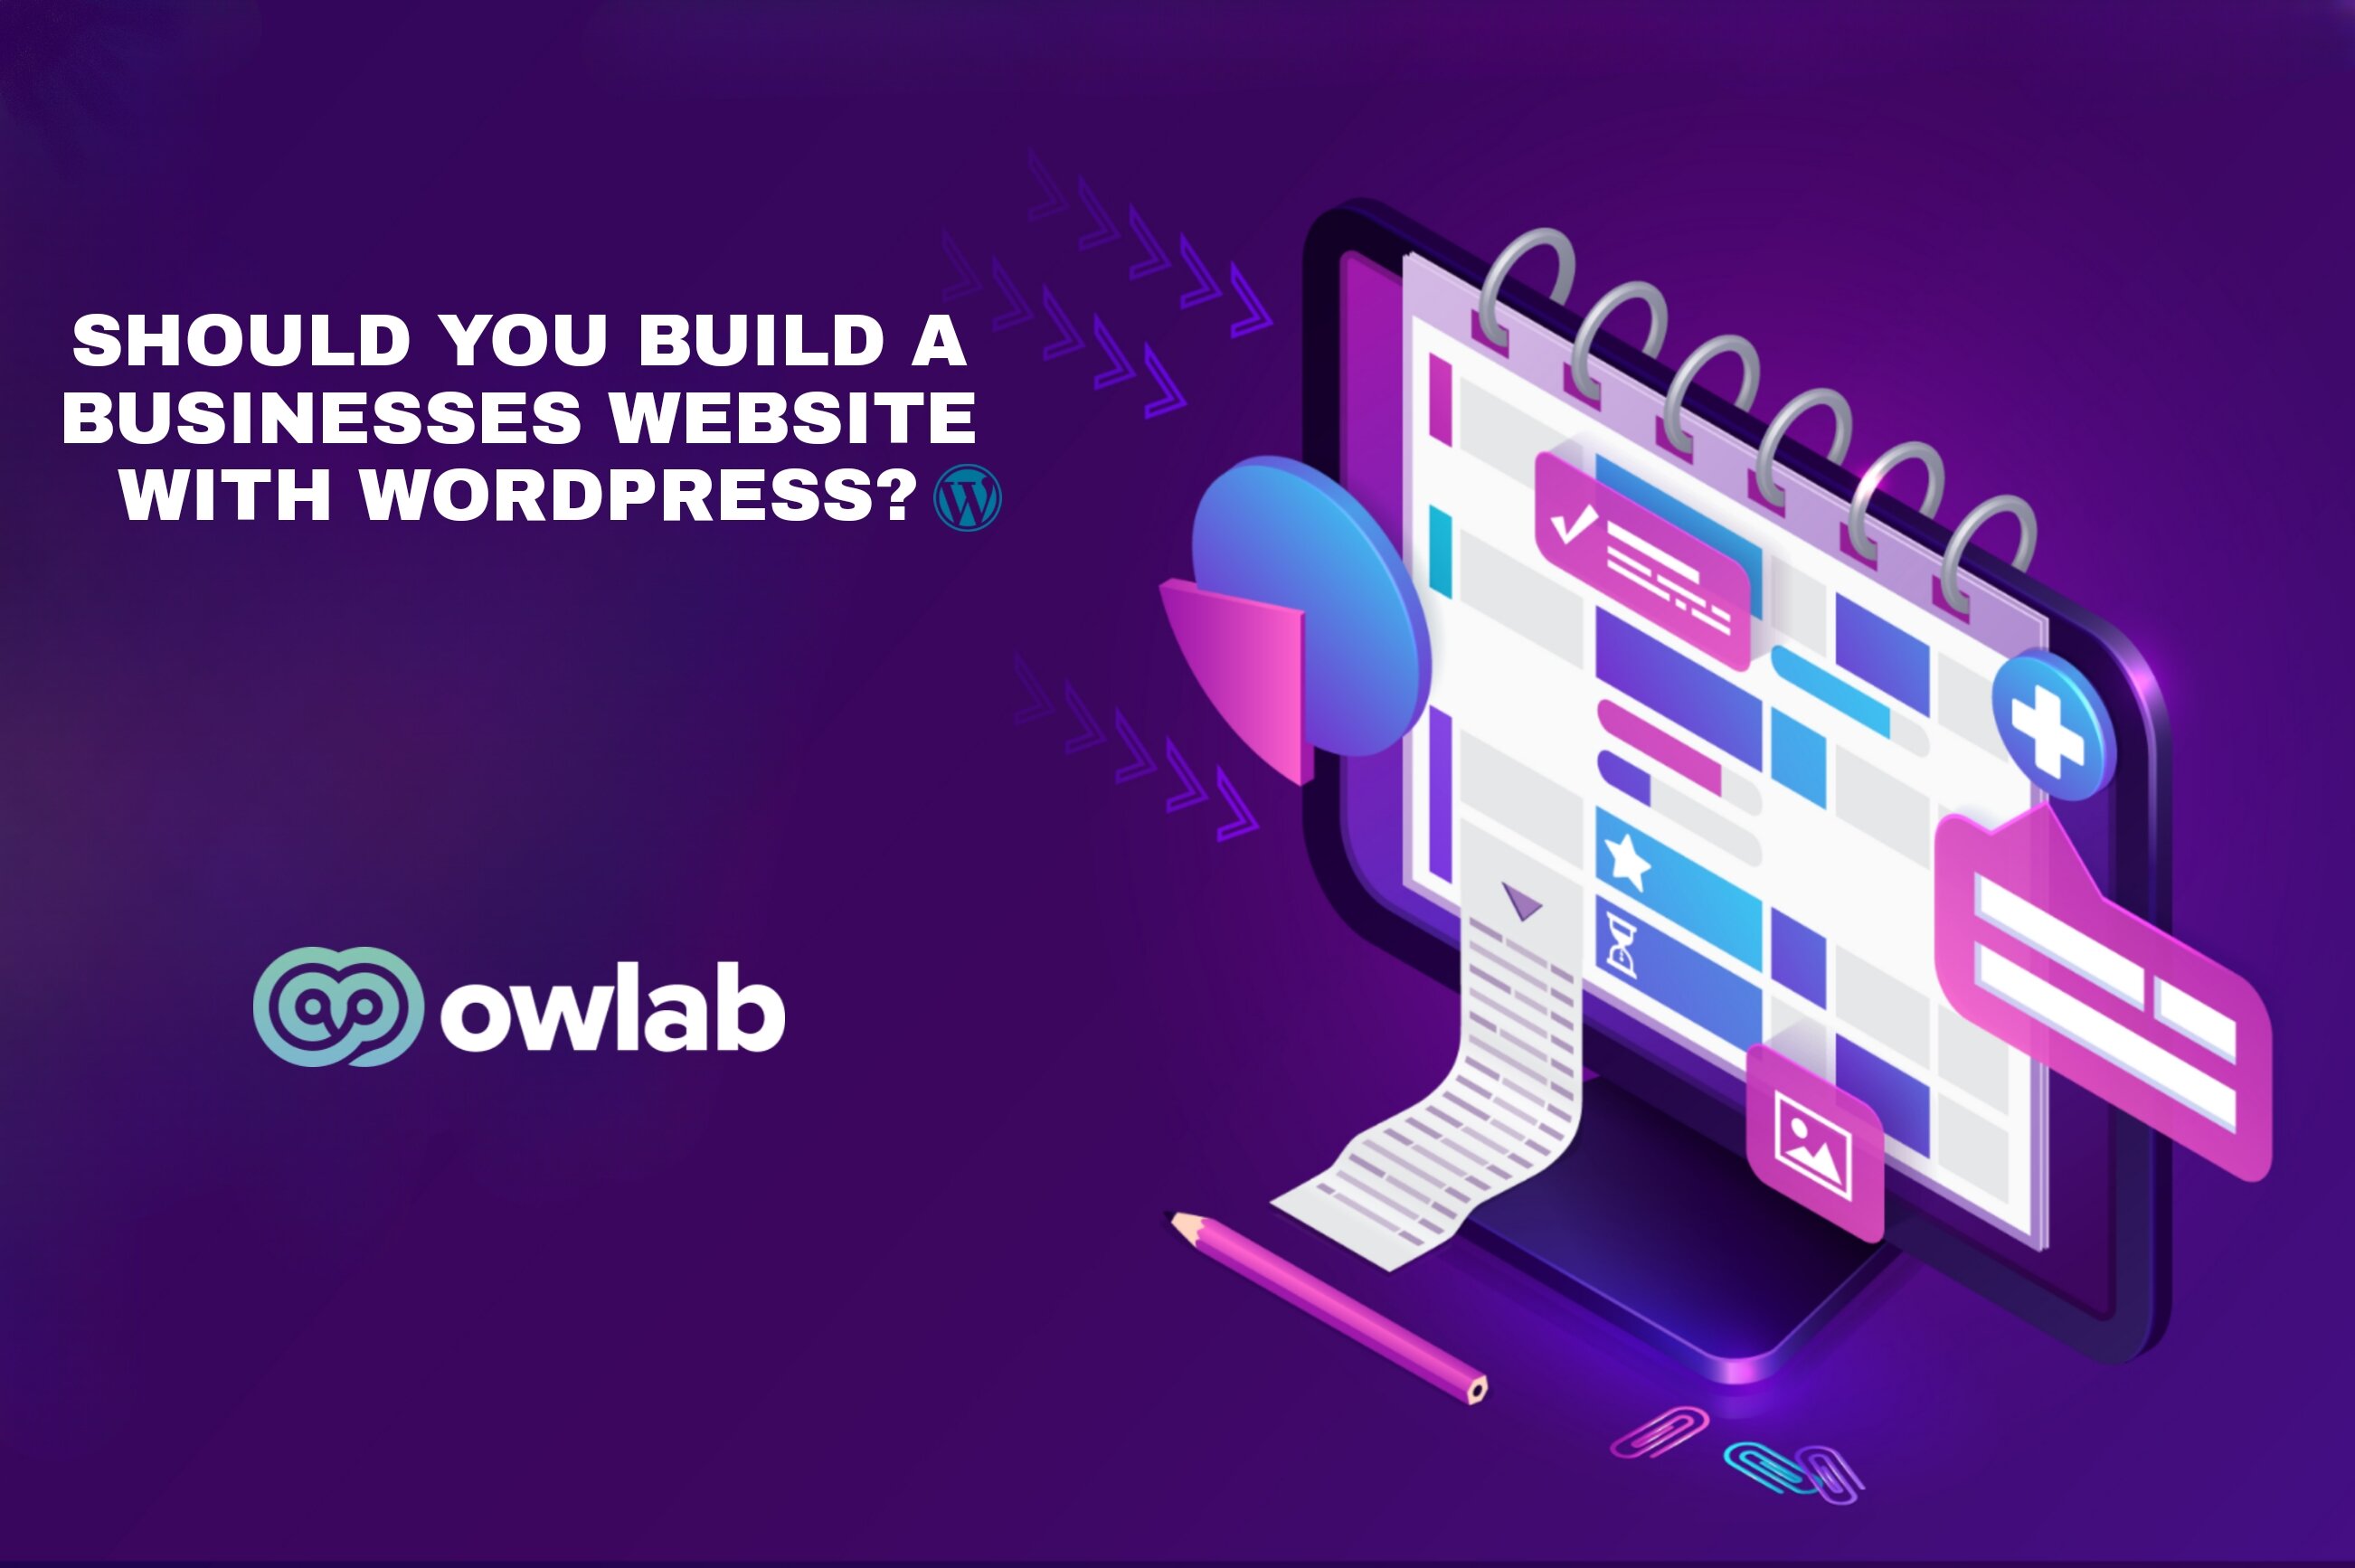 Should You Build a Business Website with WordPress?